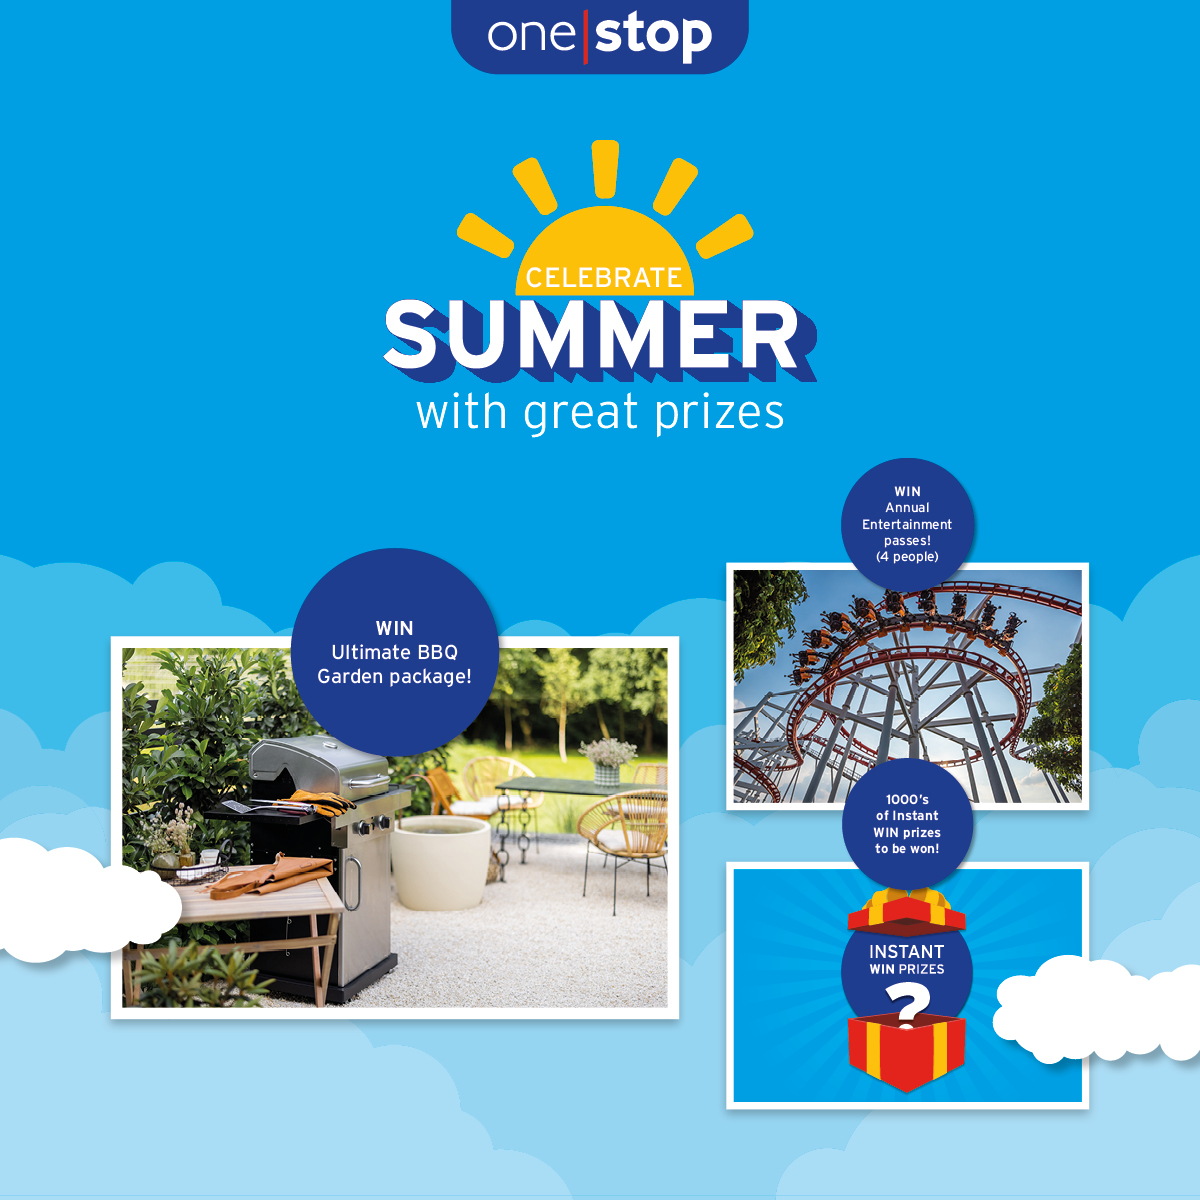 One Stop launches ‘Celebrate Summer’ campaign across all stores